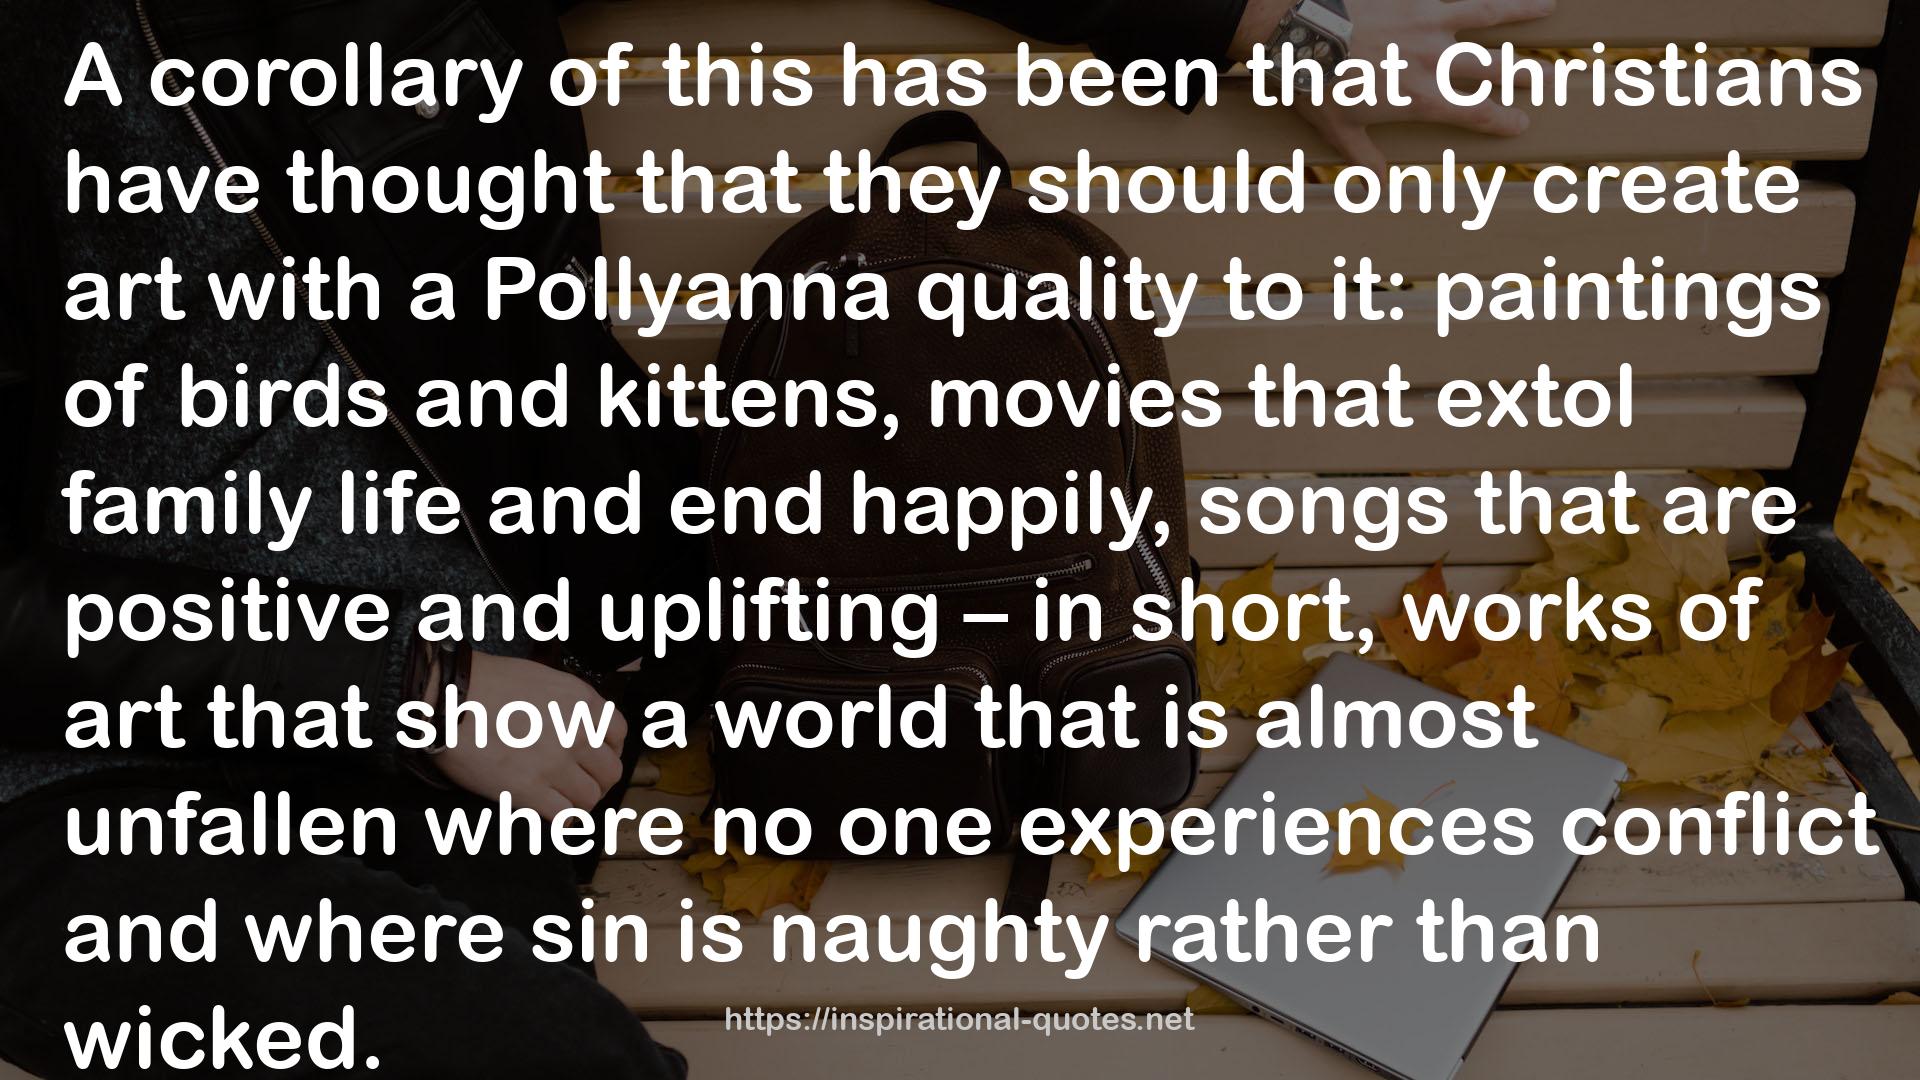 Imagine: A Vision for Christians in the Arts QUOTES